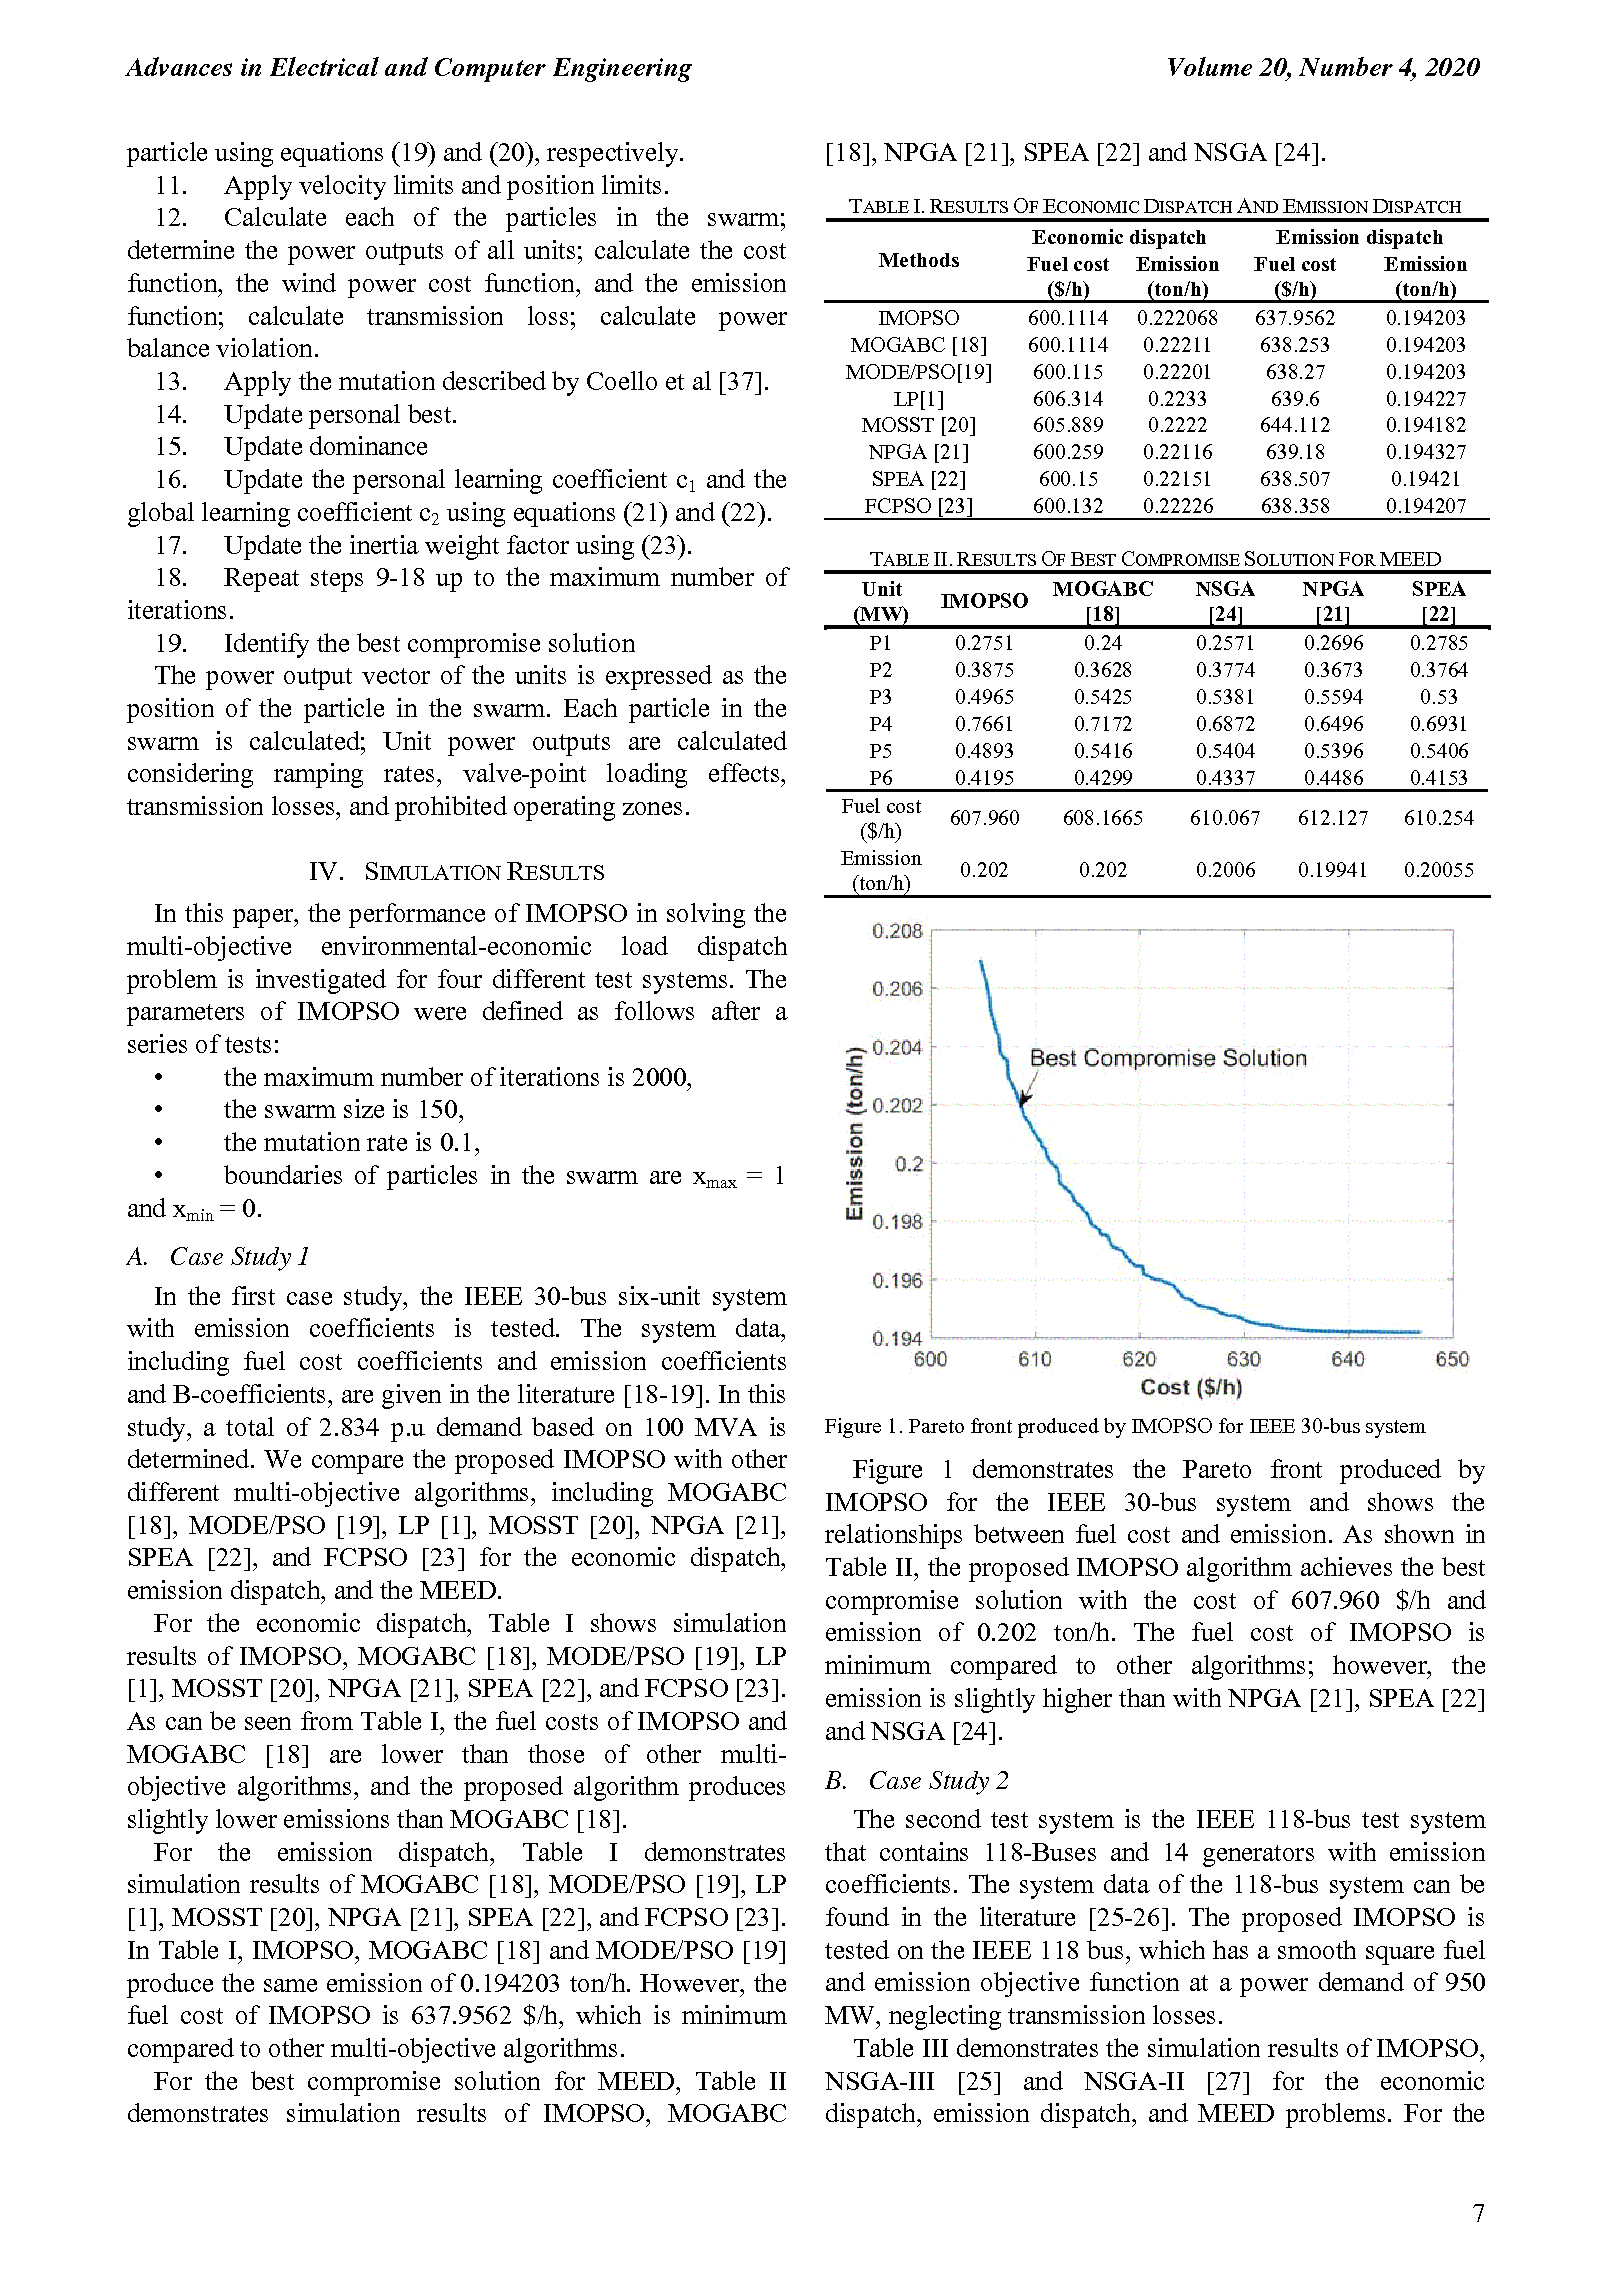 PDF Quickview for paper with DOI:10.4316/AECE.2020.04001